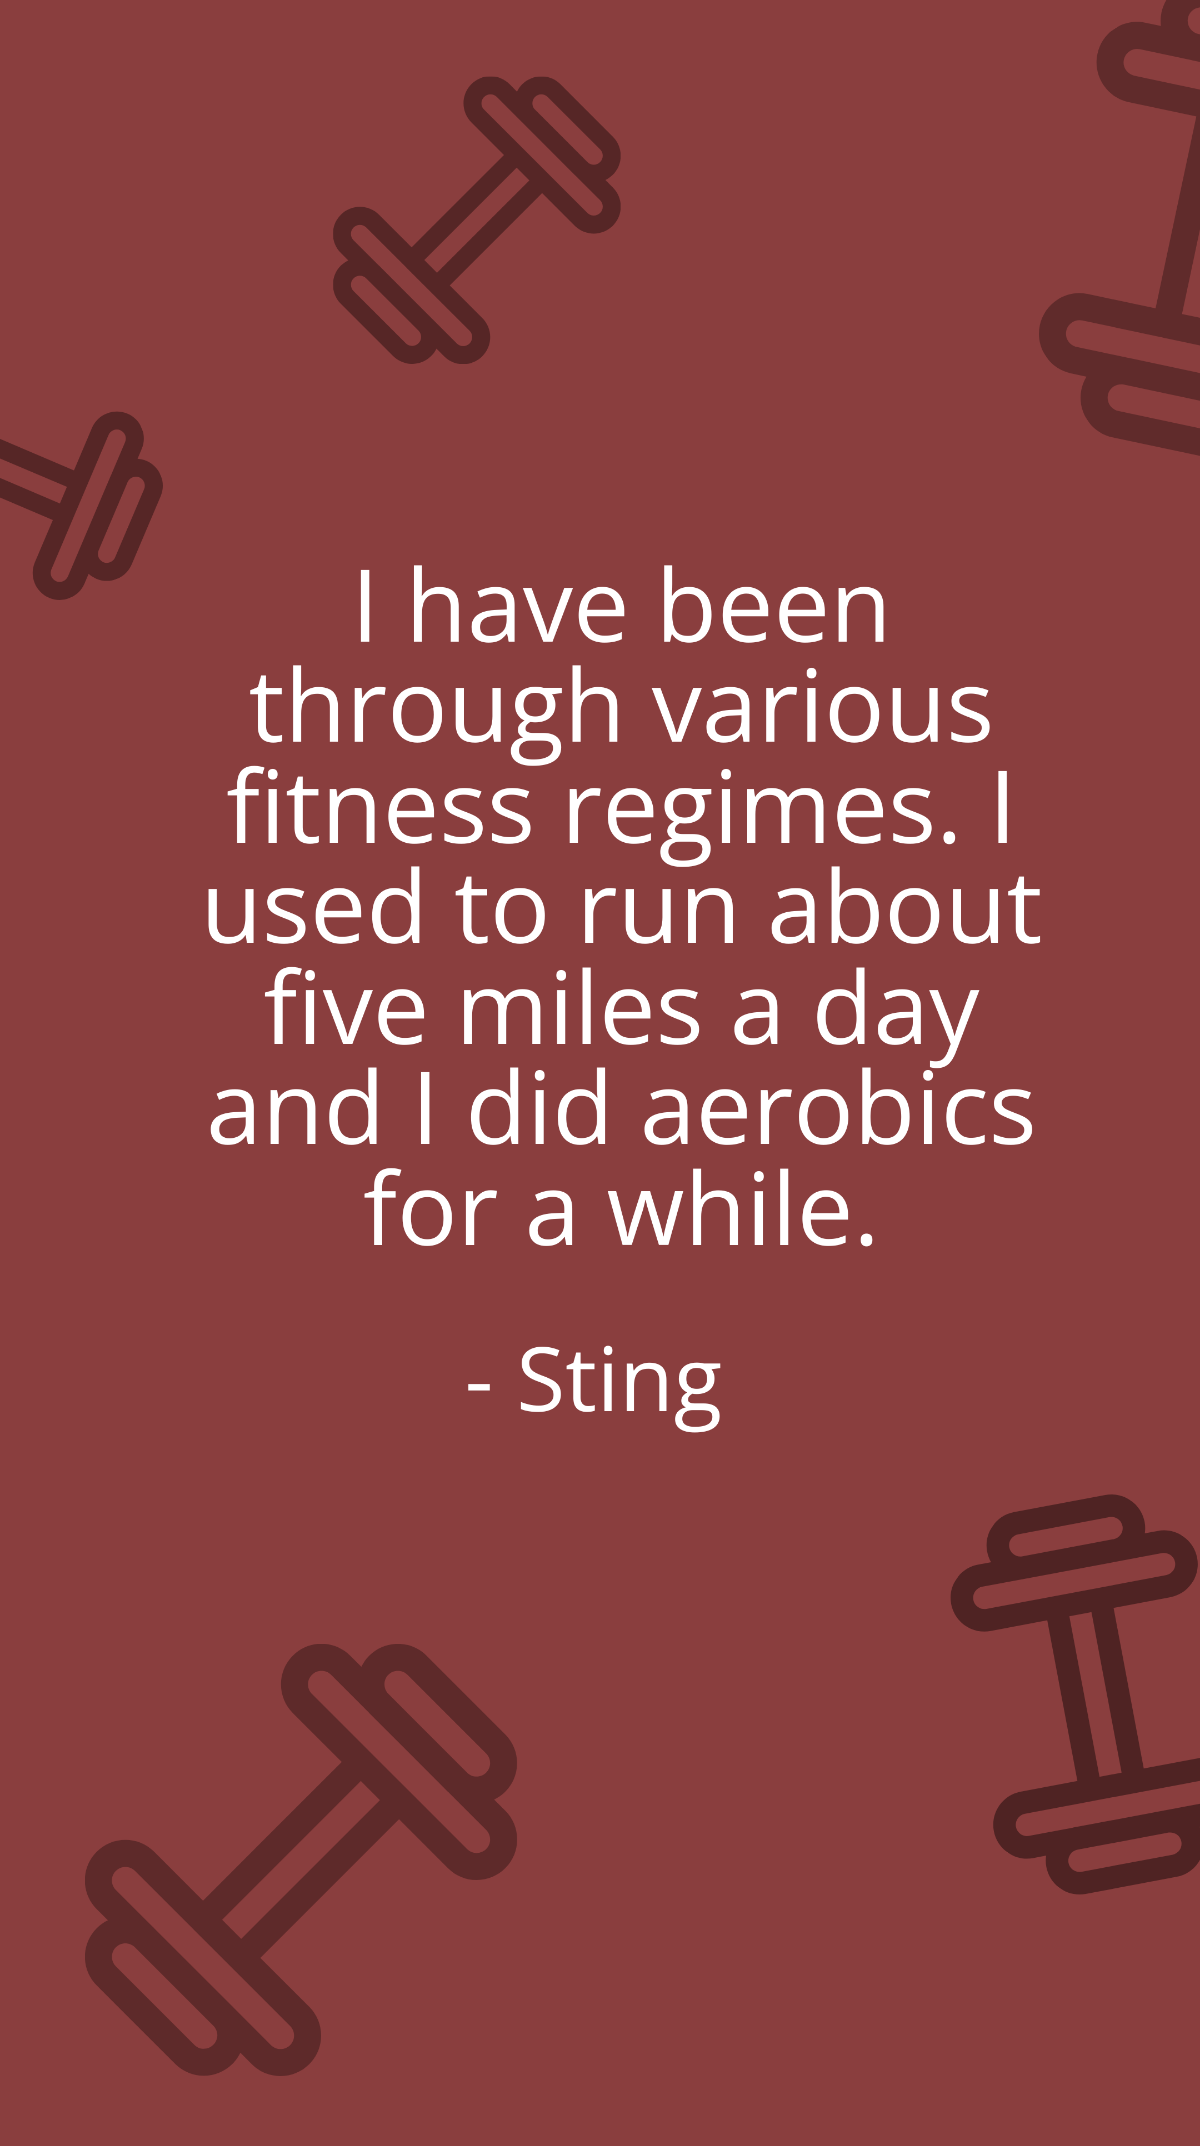 Free Sting - I have been through various fitness regimes. I used to run about five miles a day and I did aerobics for a while. Template